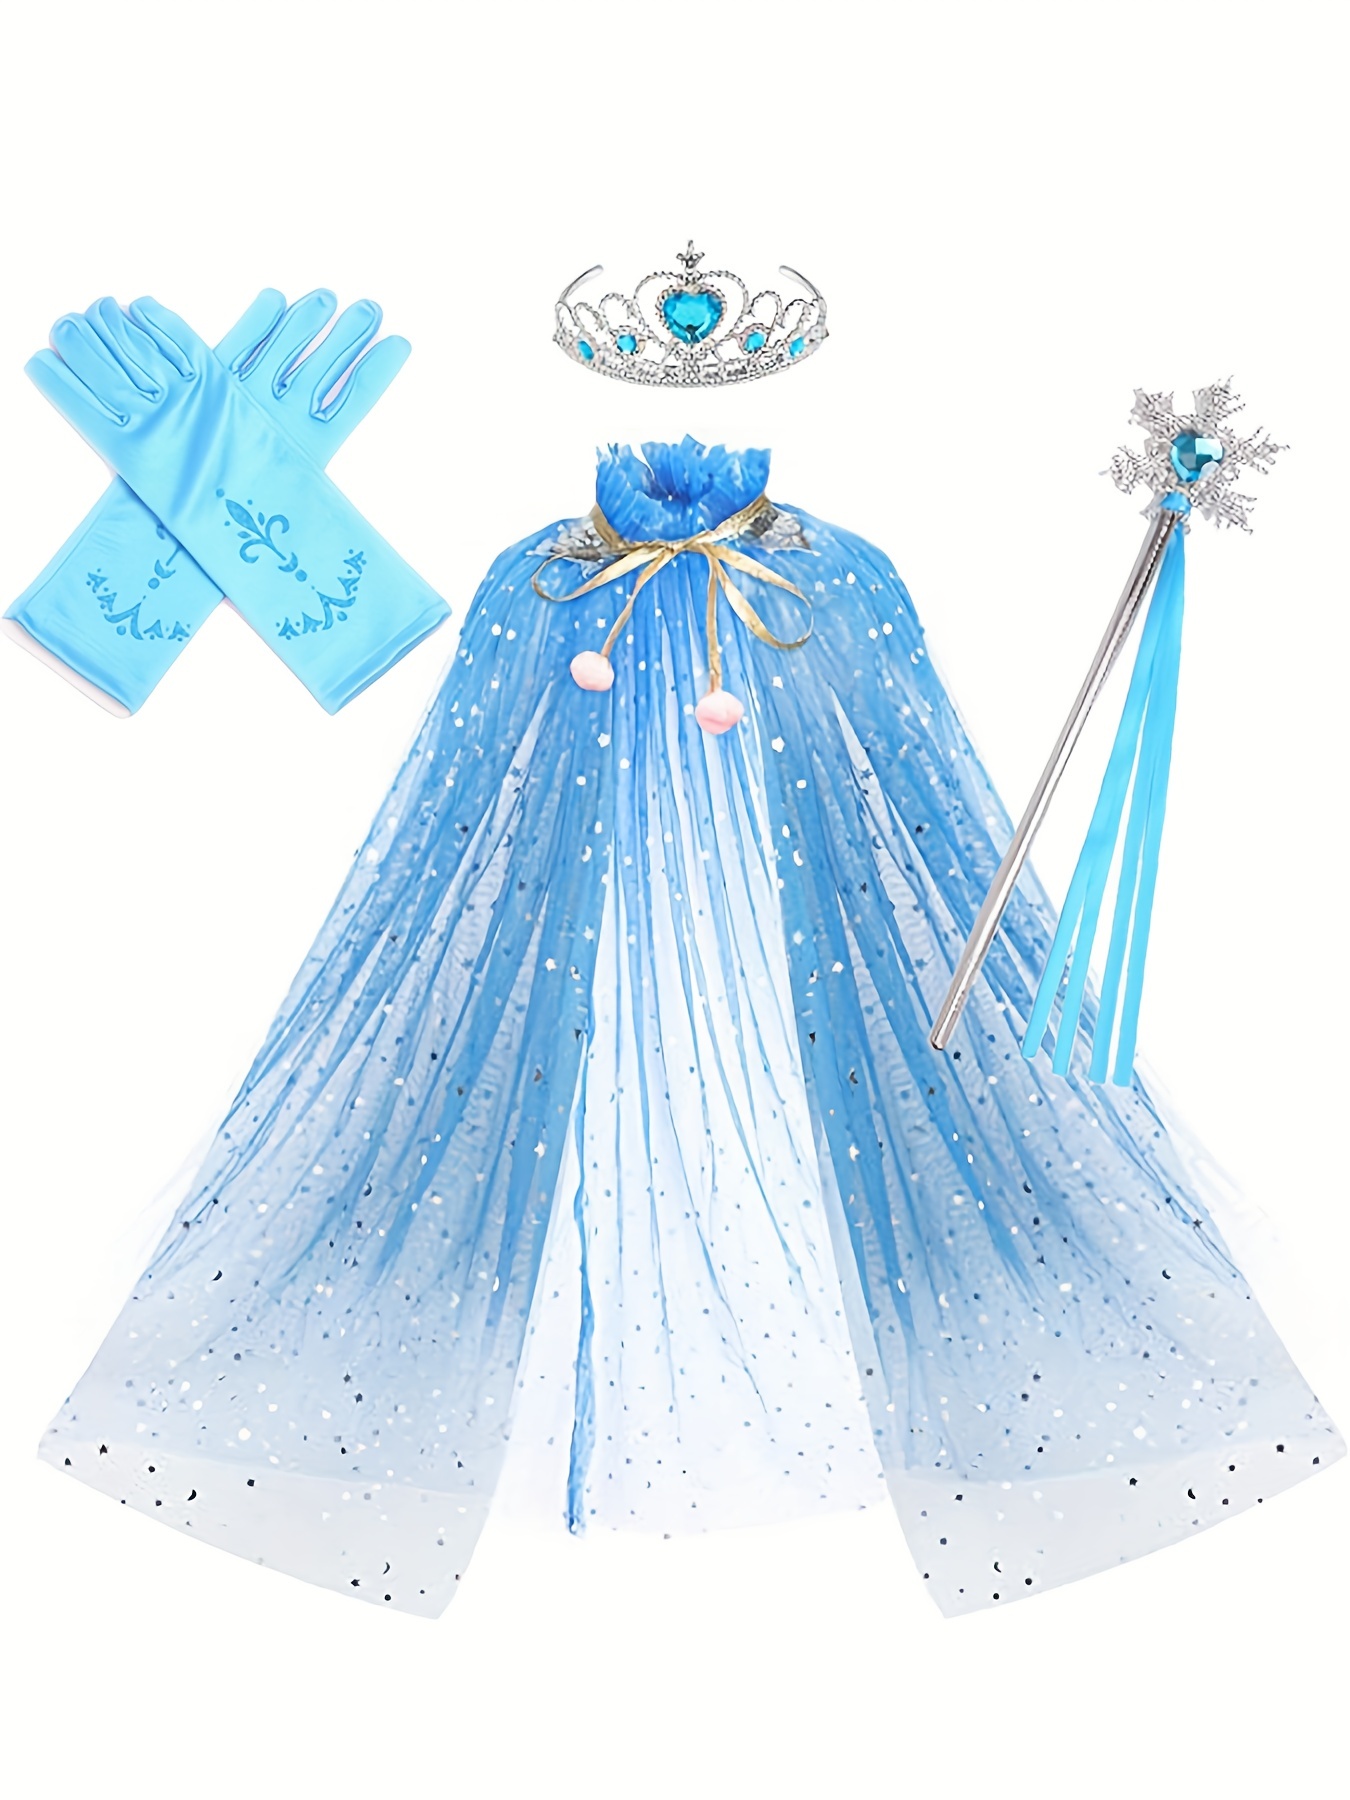 Frozen Elsa Dress Up Costume With Cosplay Accessories Crown Wand & Gloves 